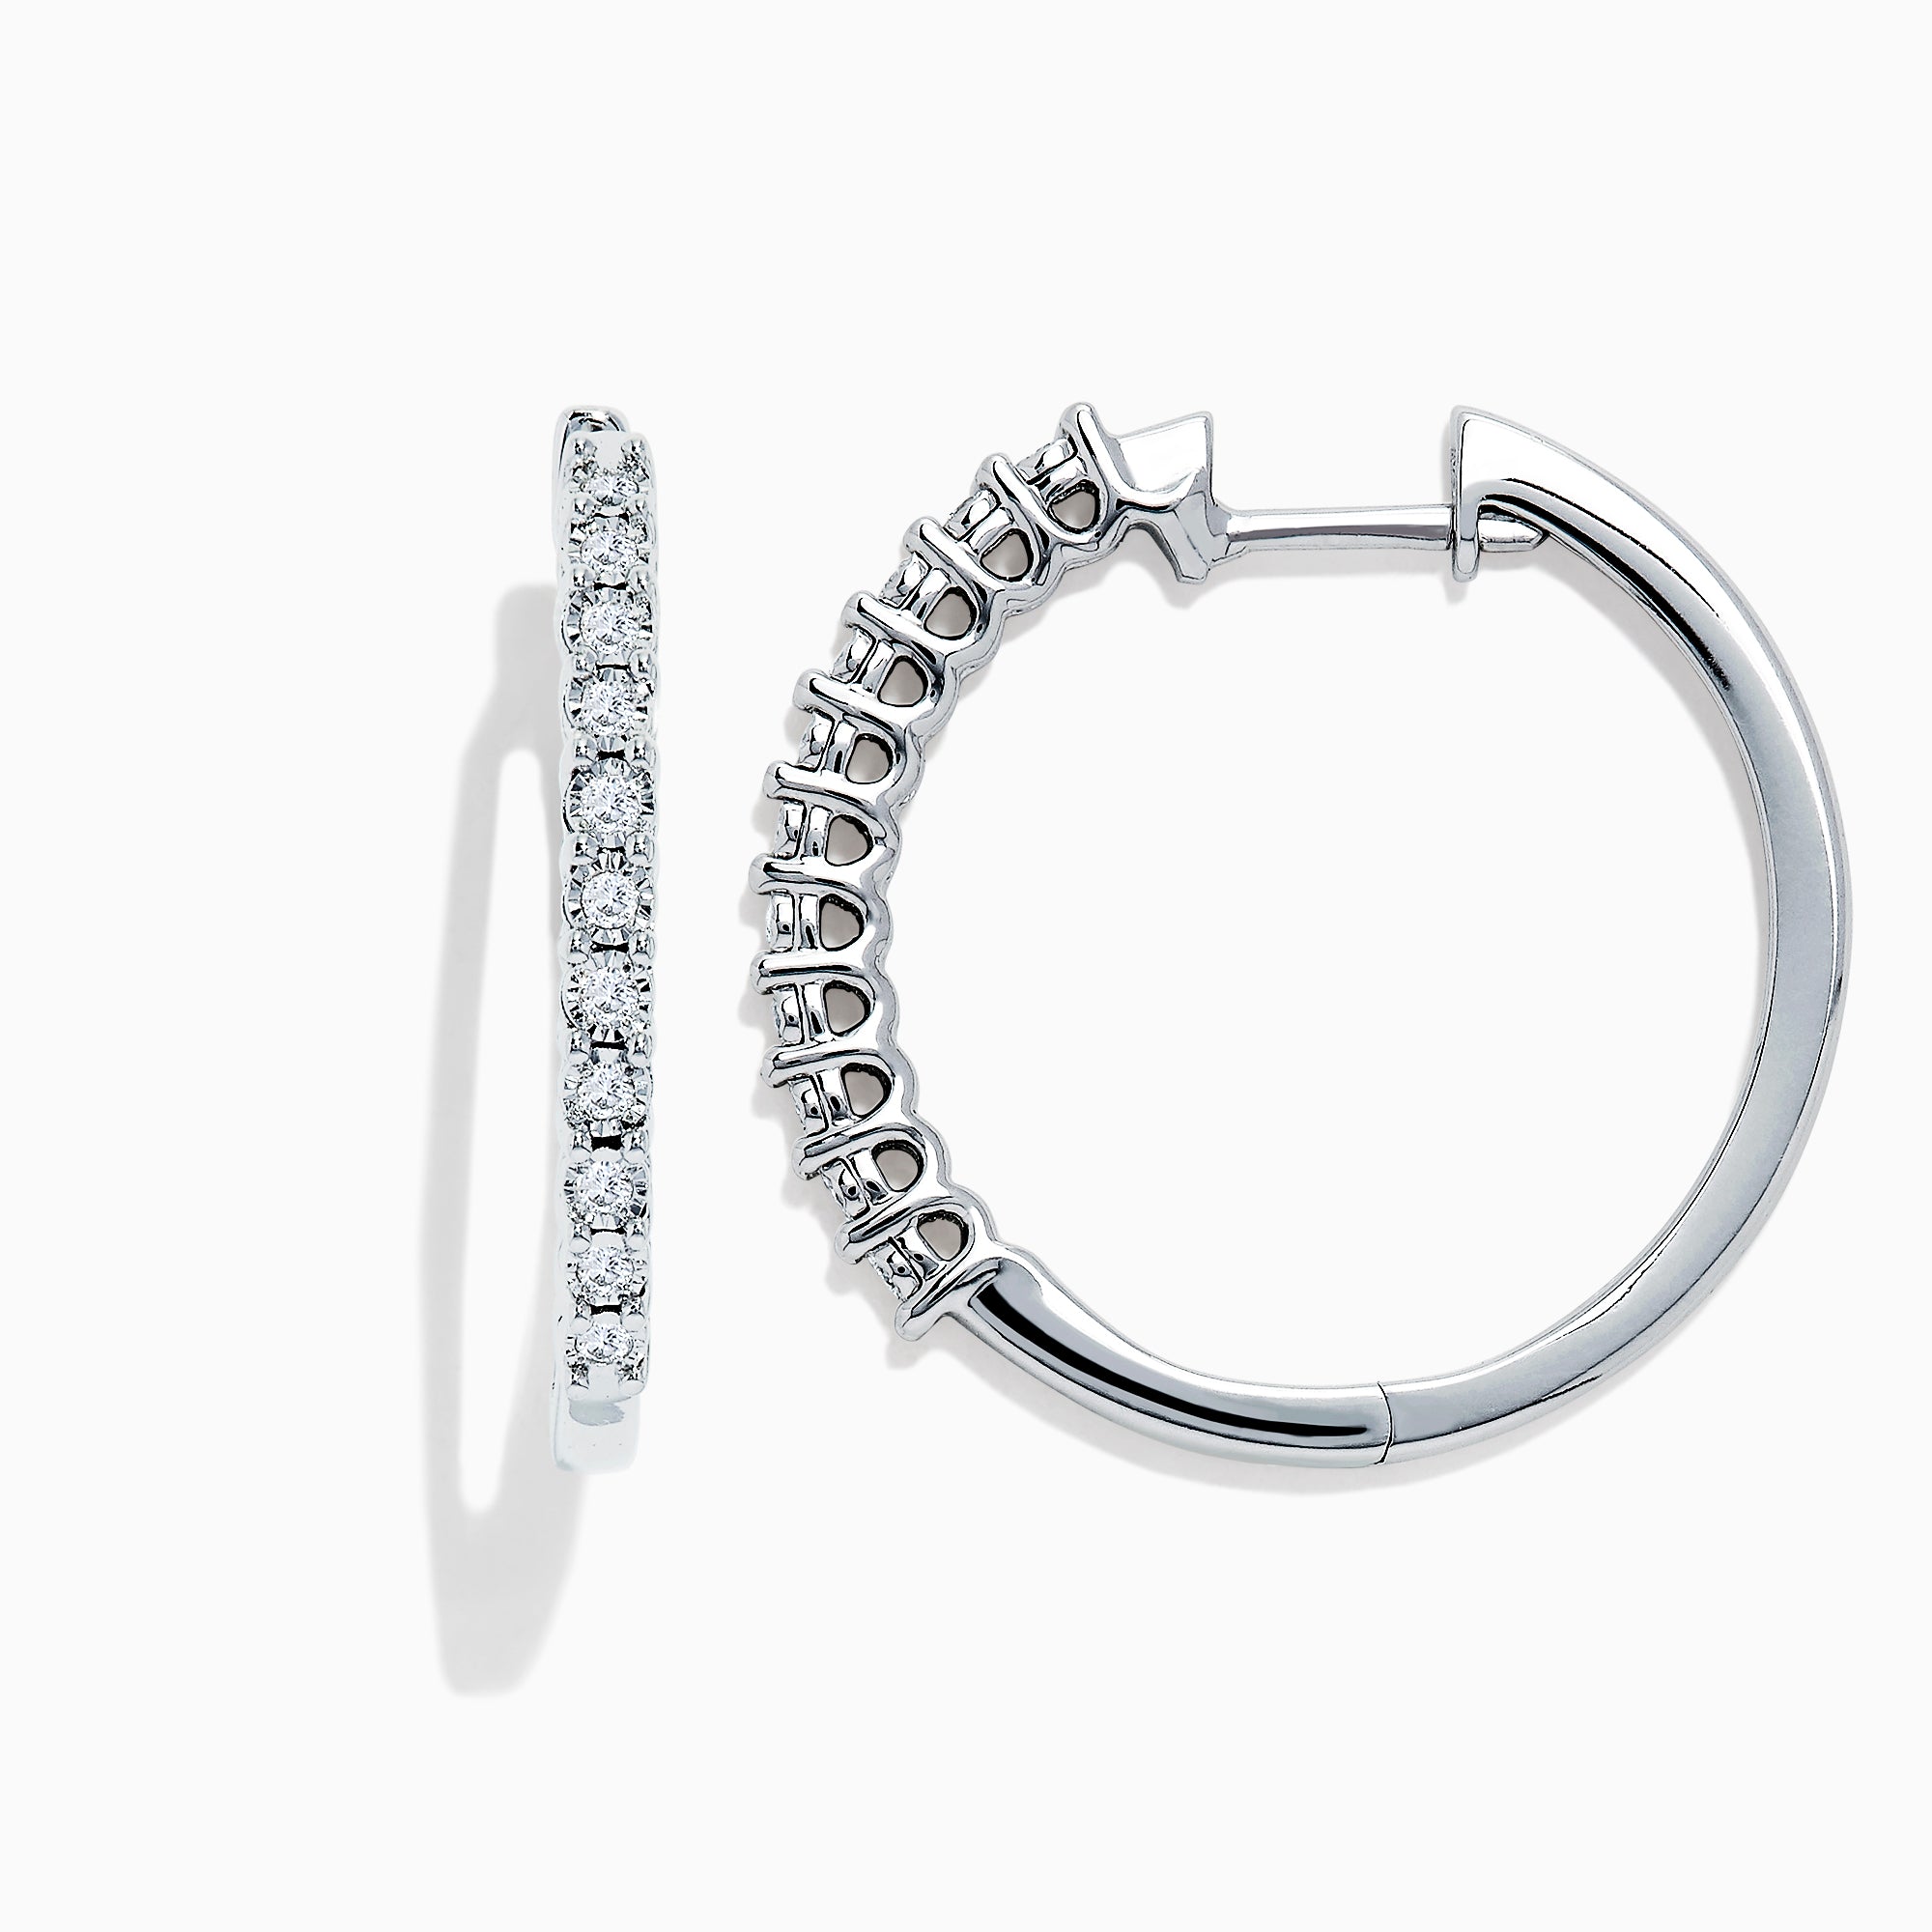 Inside-Out Natural White Round Diamond Bali Hoop Earrings